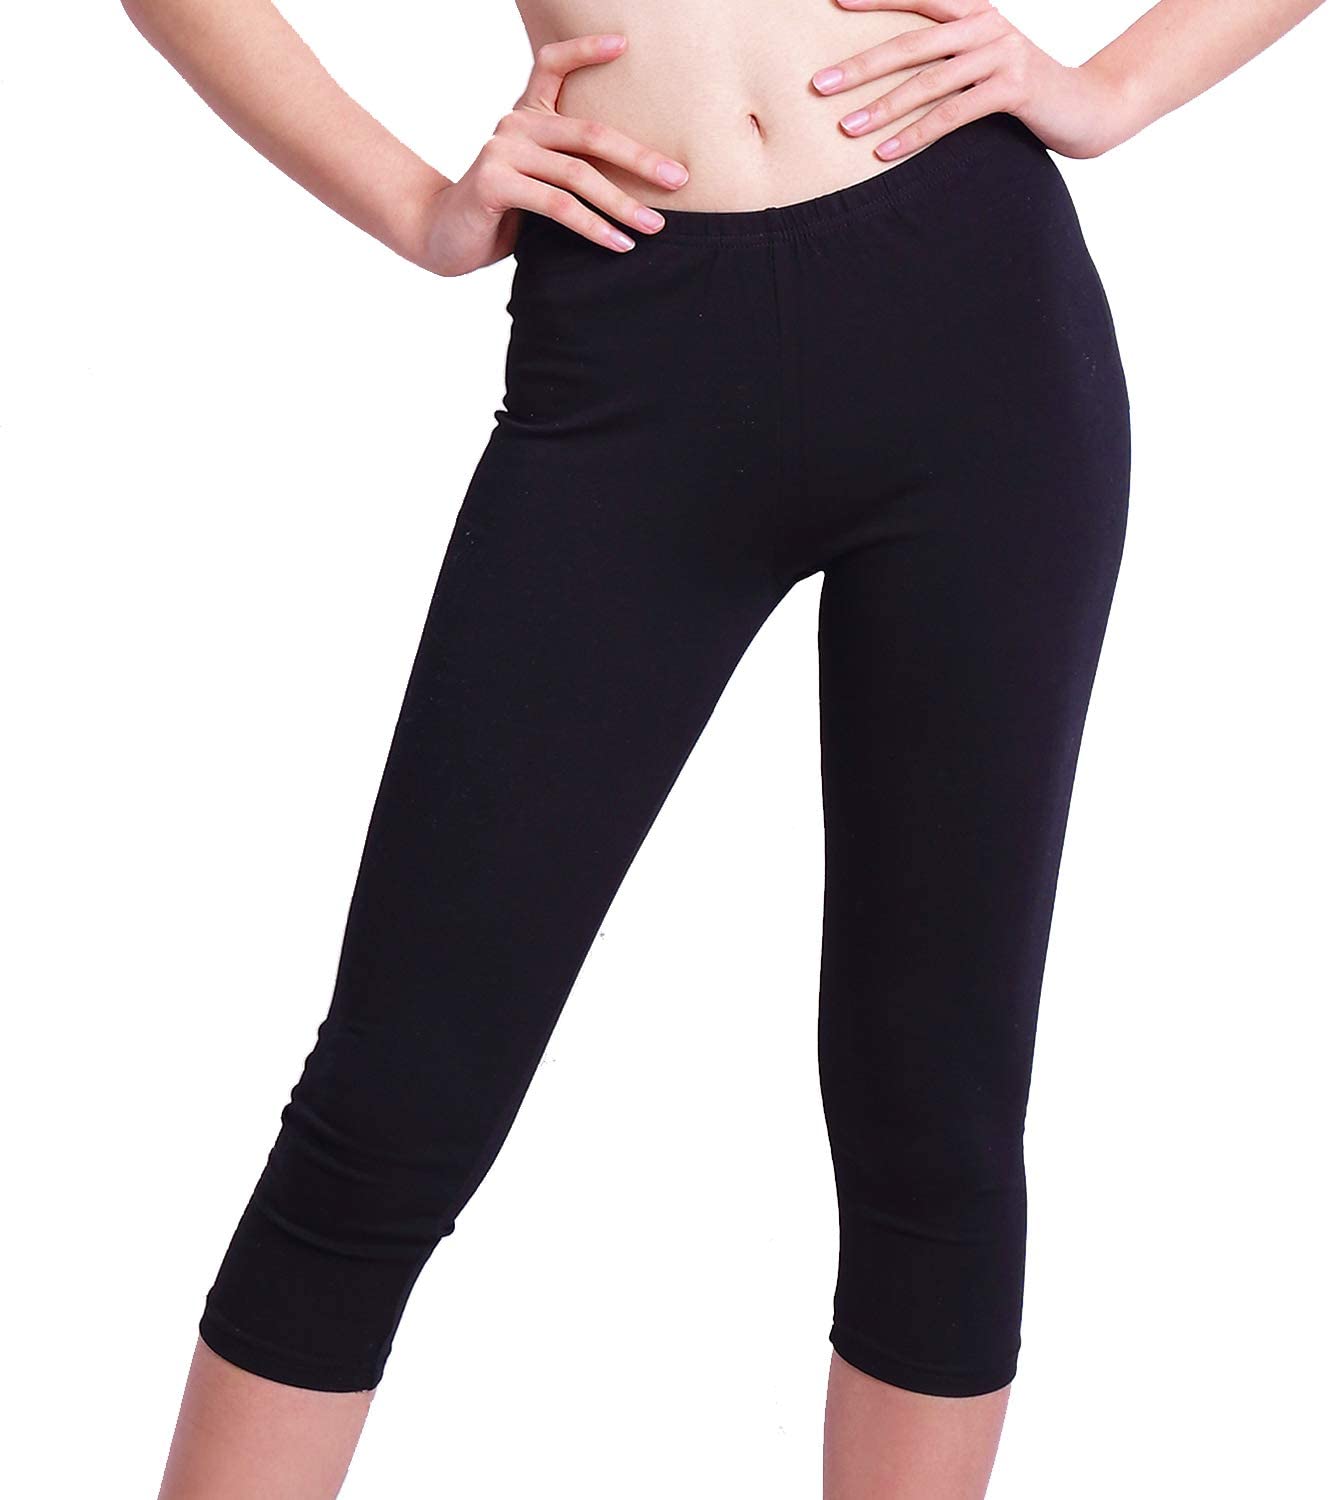 Best Yoga Pants to Hide Cellulite - Yoga in my Pocket